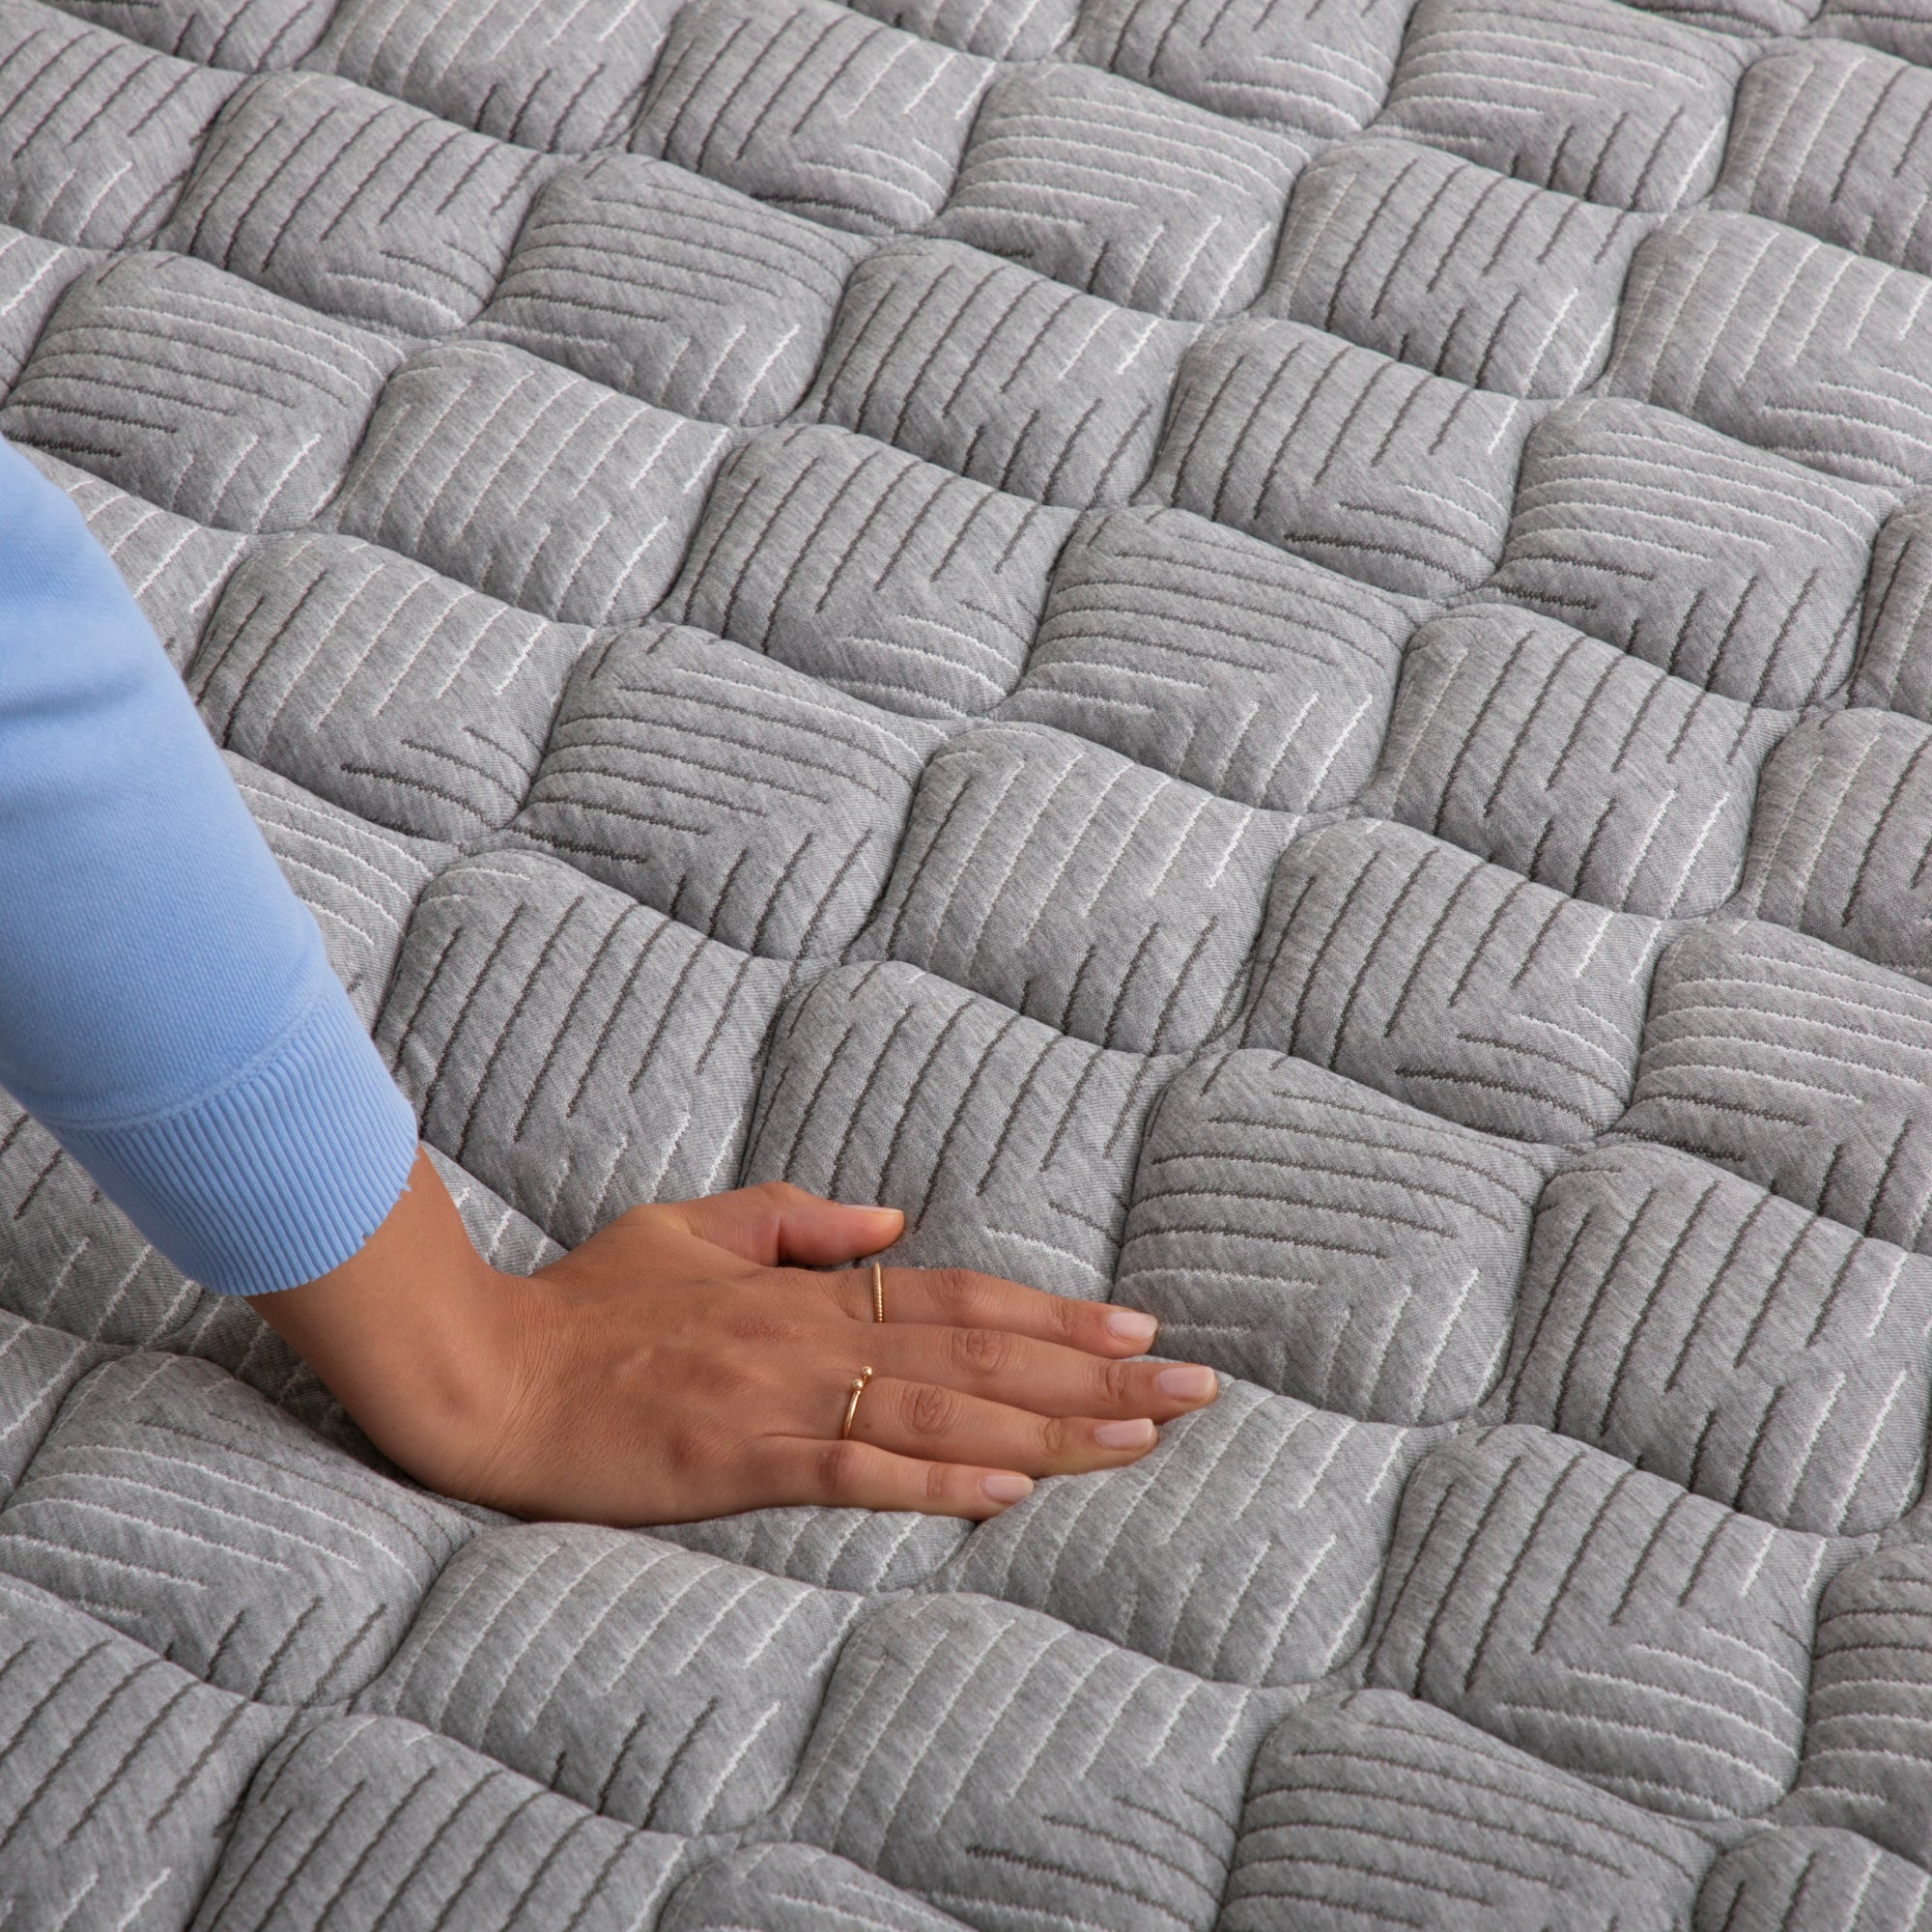 Simmons® Deep Sleep™ Quilted Firm